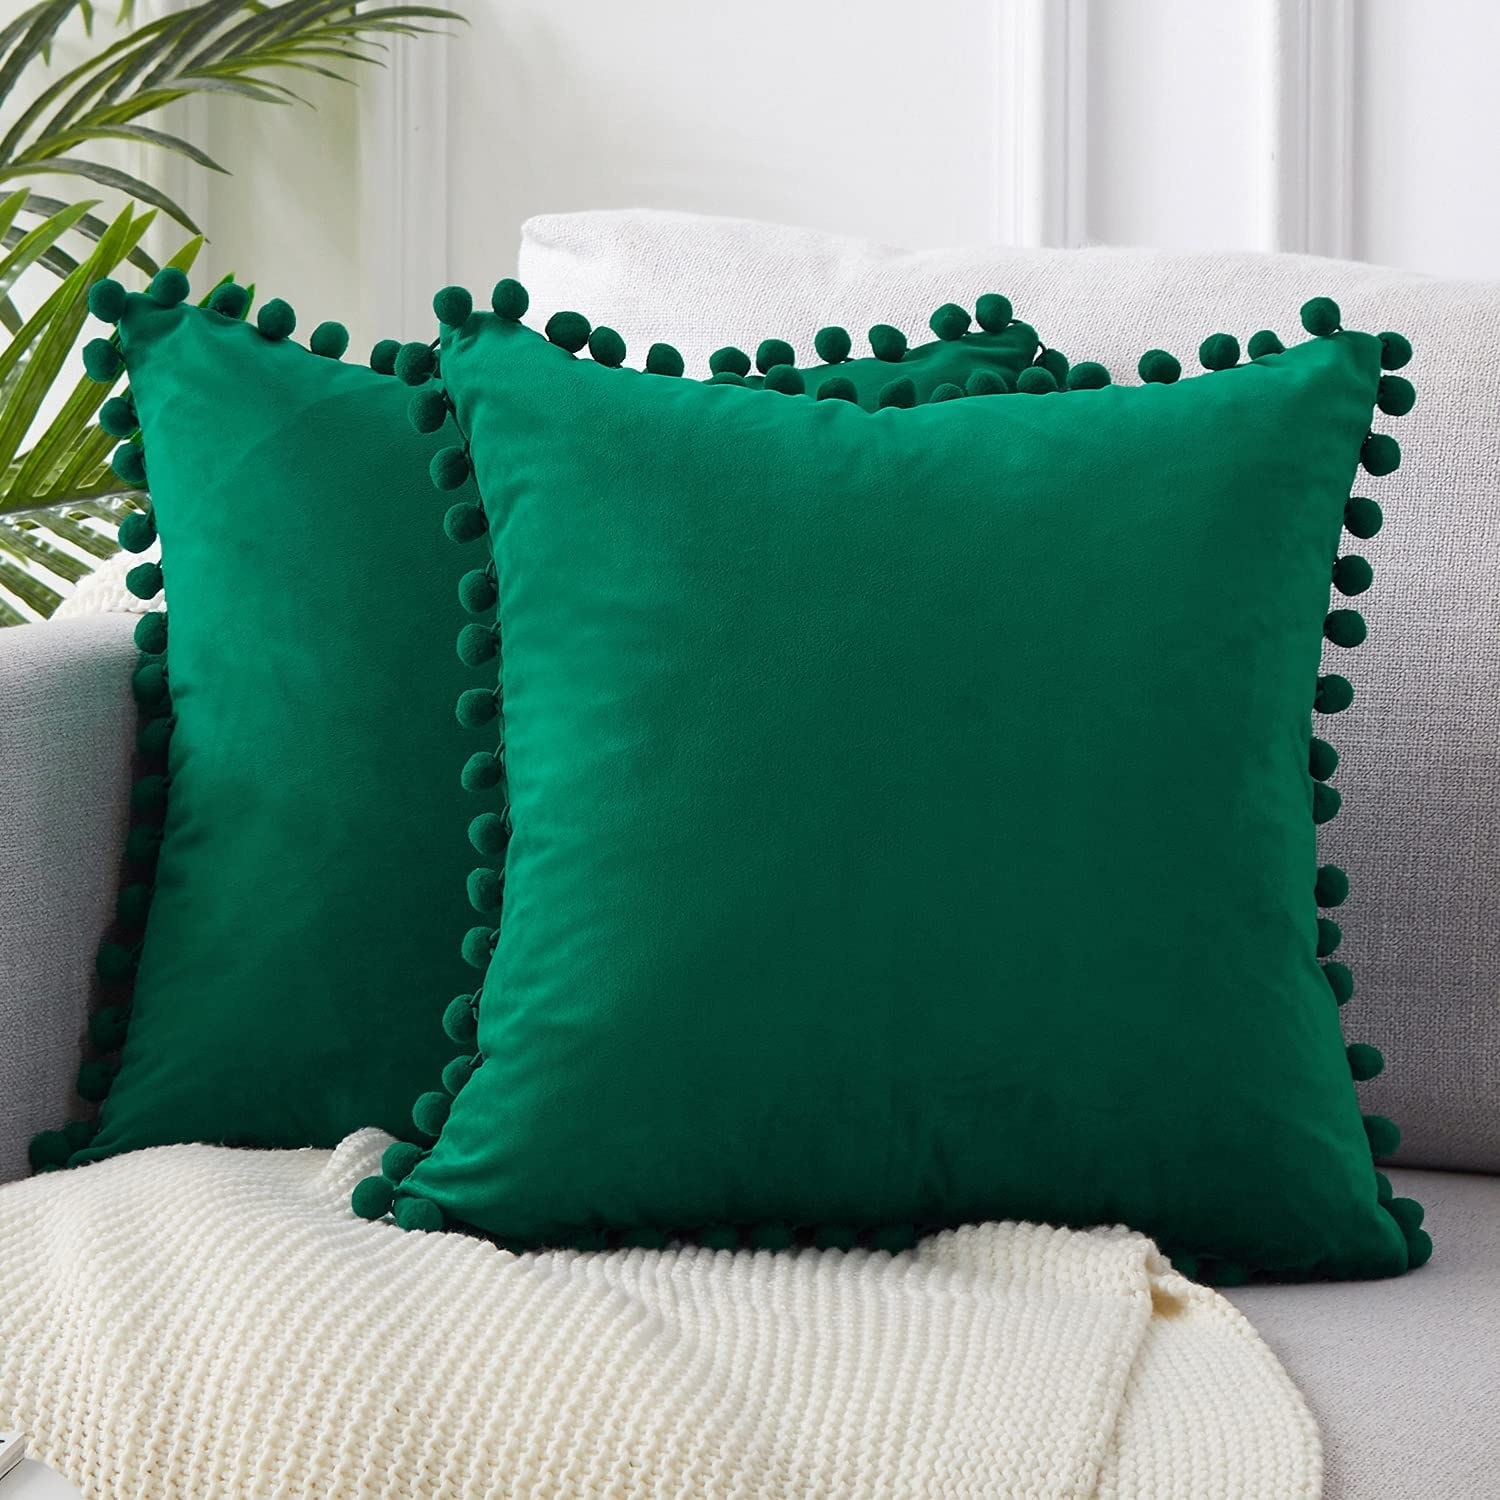 a pair of jewel-toned pillow shams with decorative pom poms around the edges